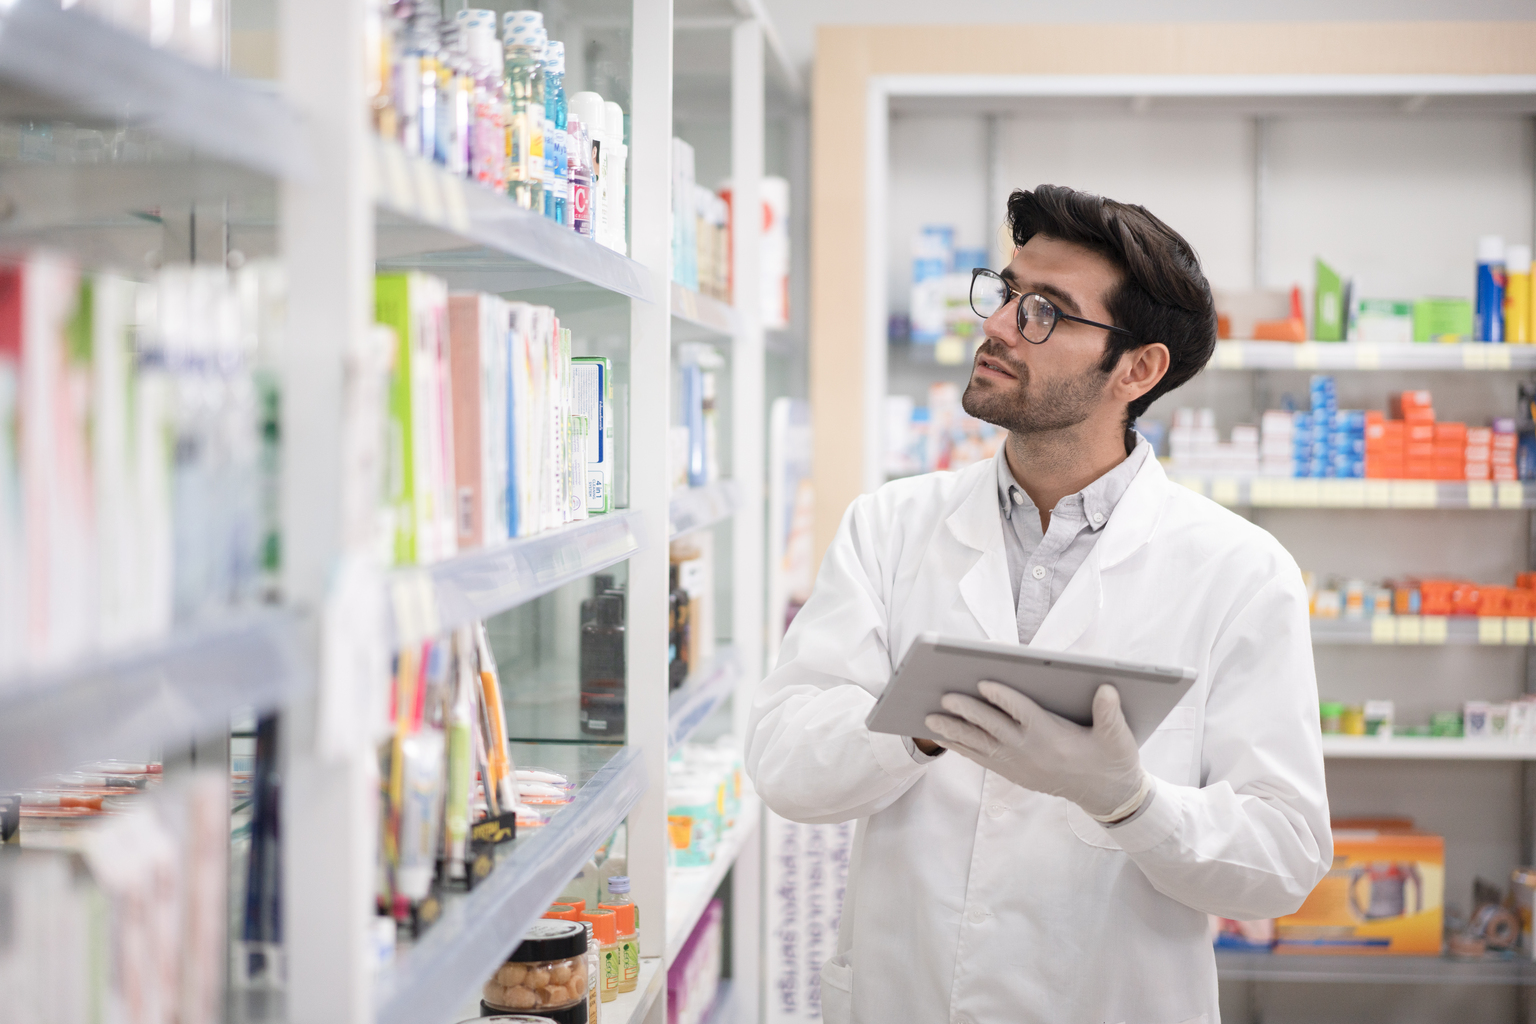 White man using a digital tablet to take inventory in a pharmacy.